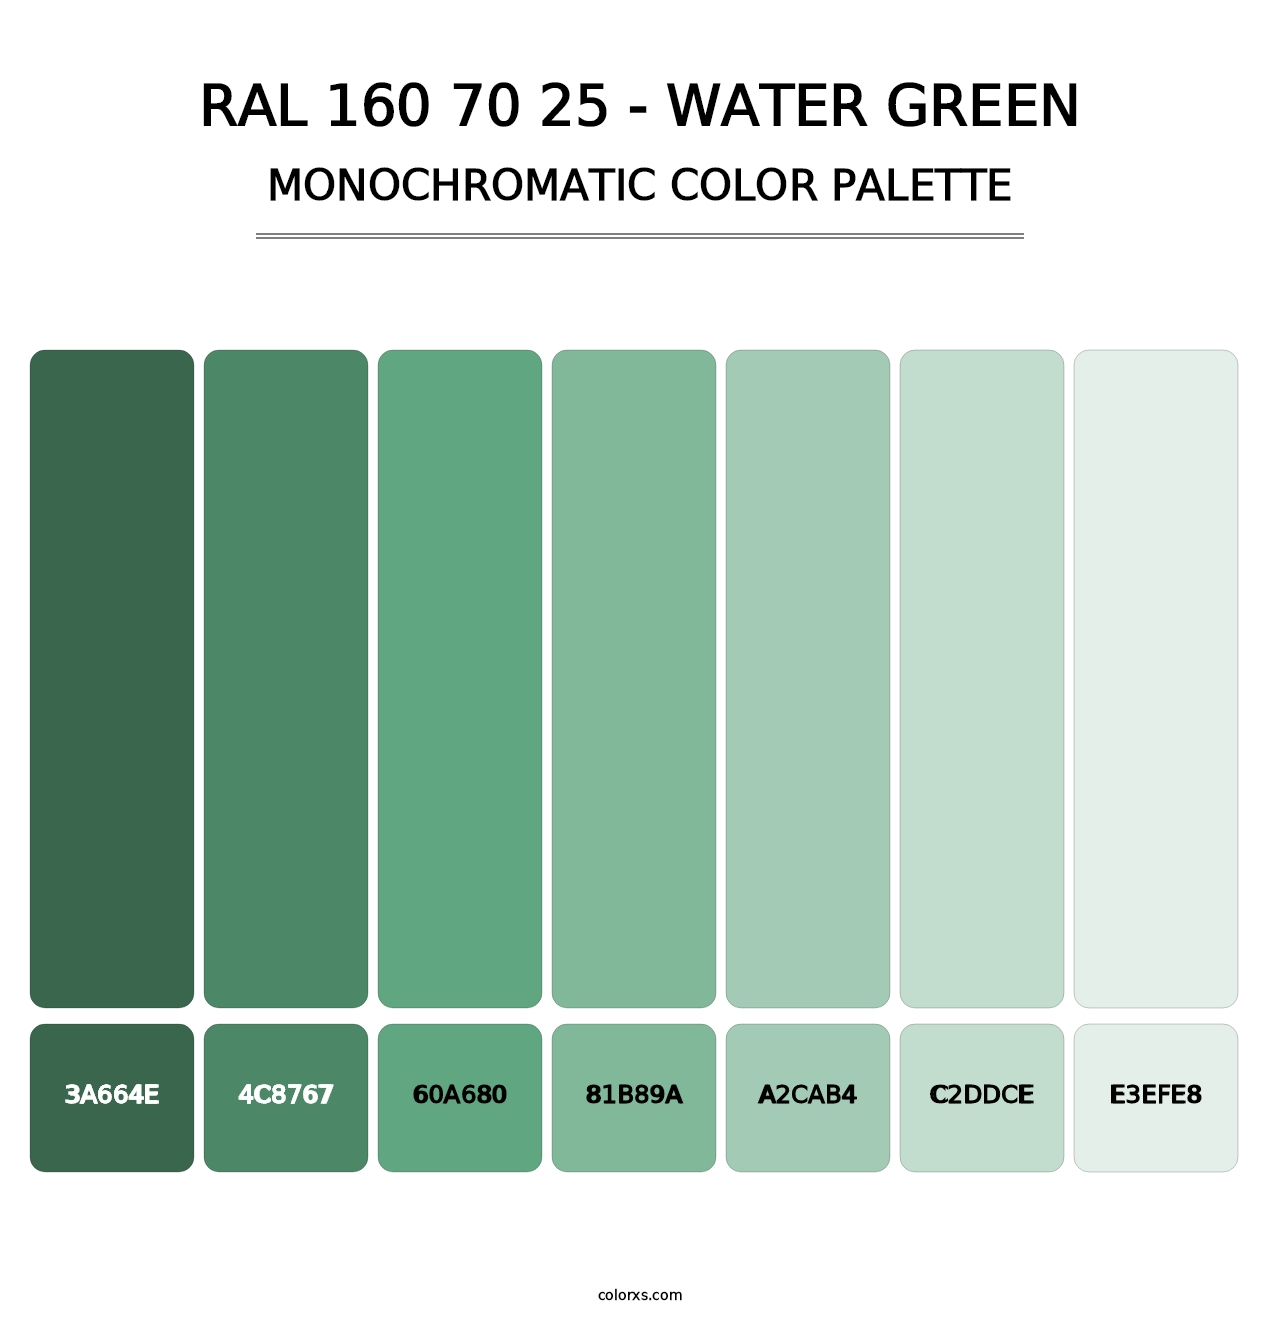 RAL 160 70 25 - Water Green - Monochromatic Color Palette